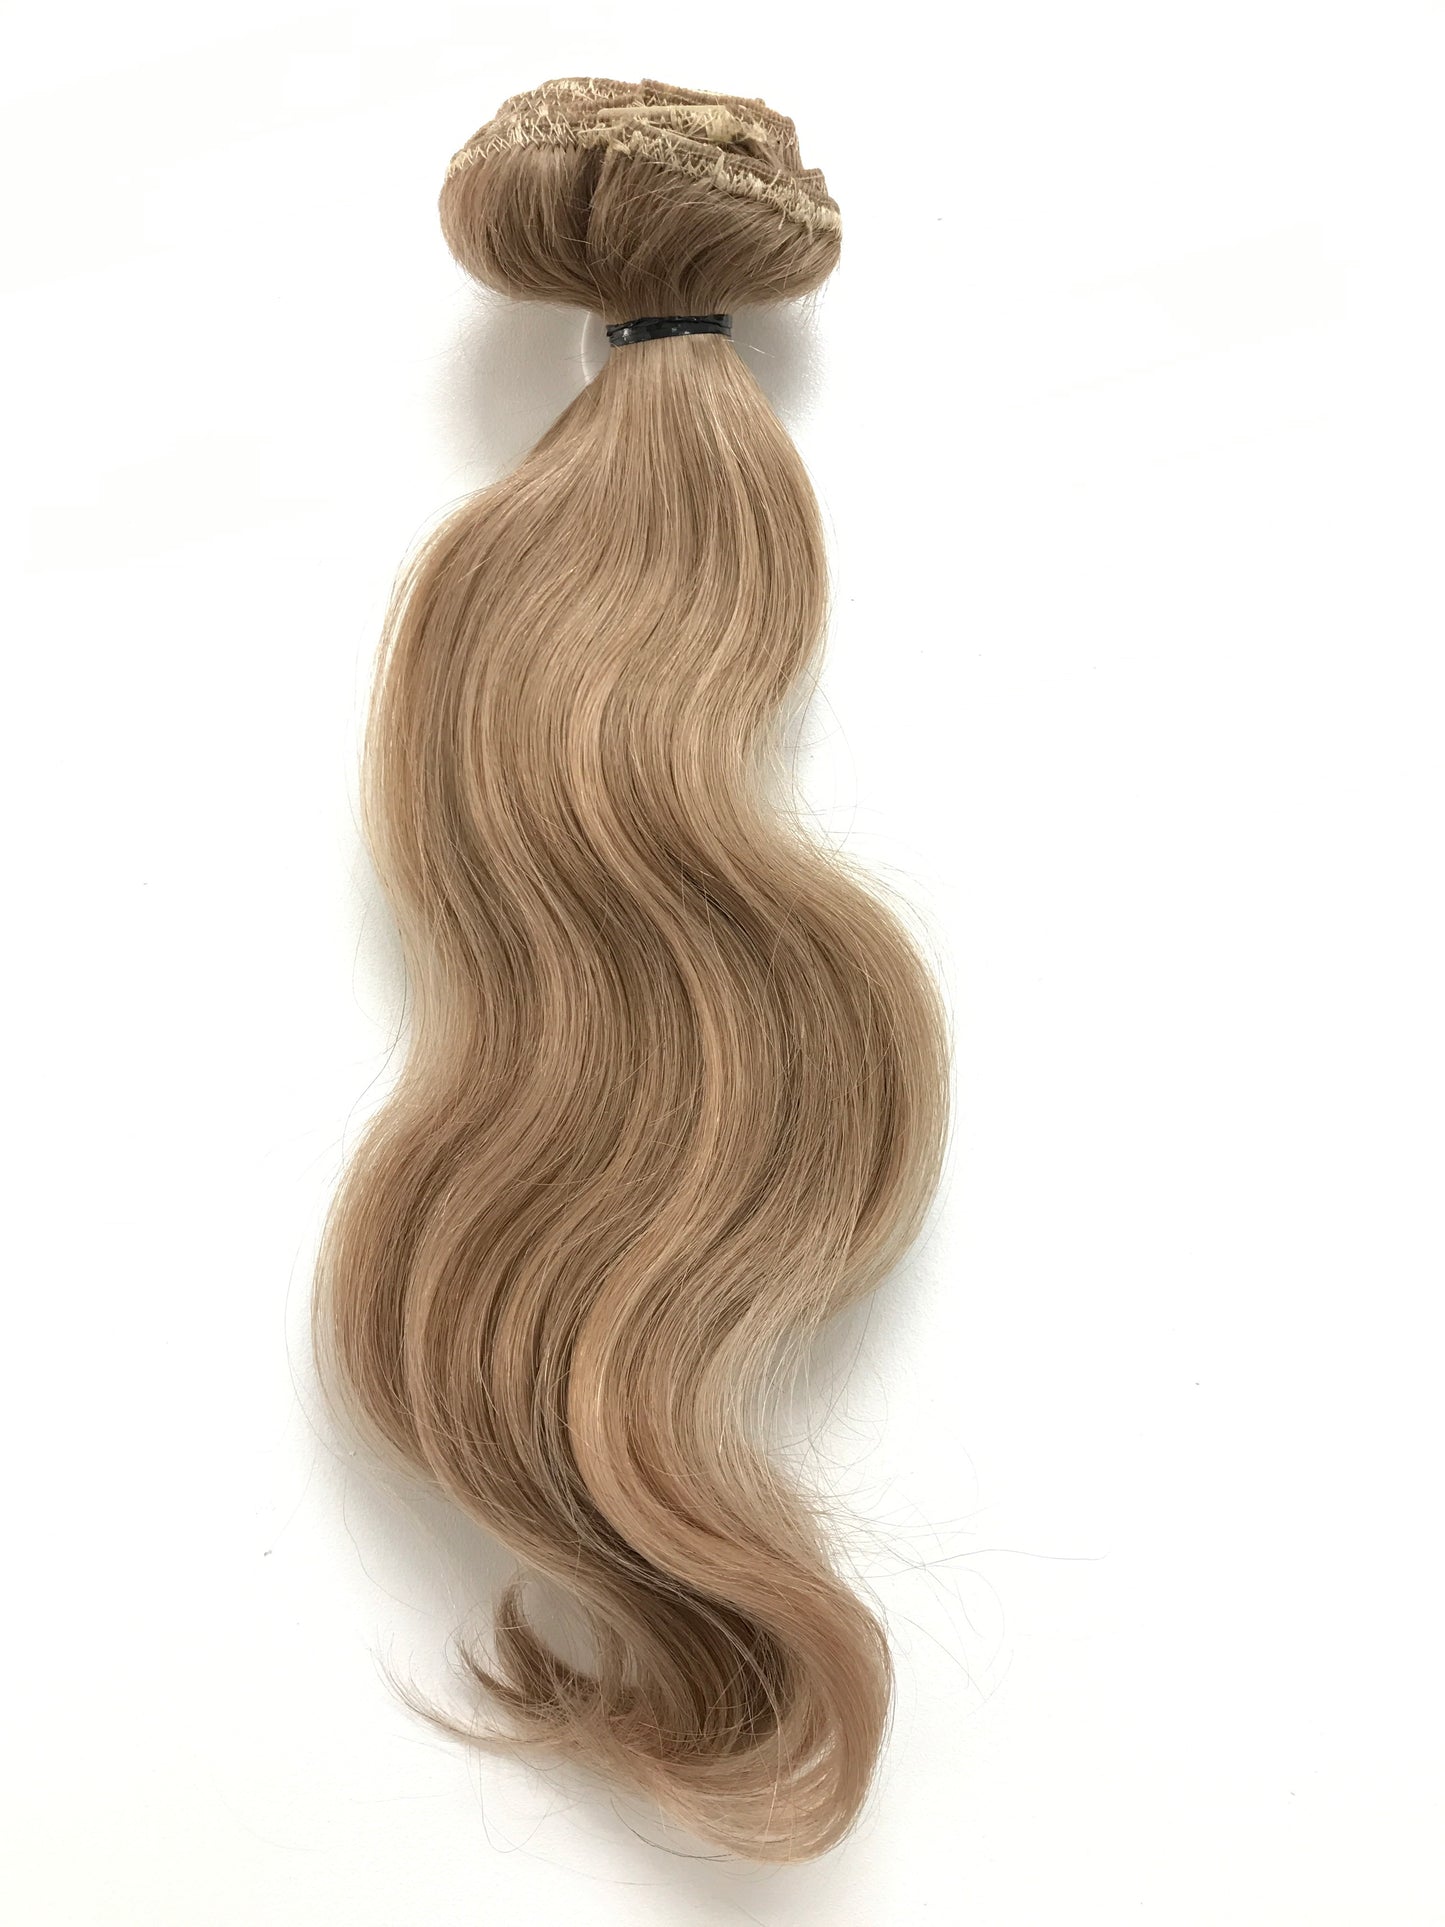 European Virgin Remy Human Hair, Clip In, 12 Inches, Wavy, Quick Shipping!